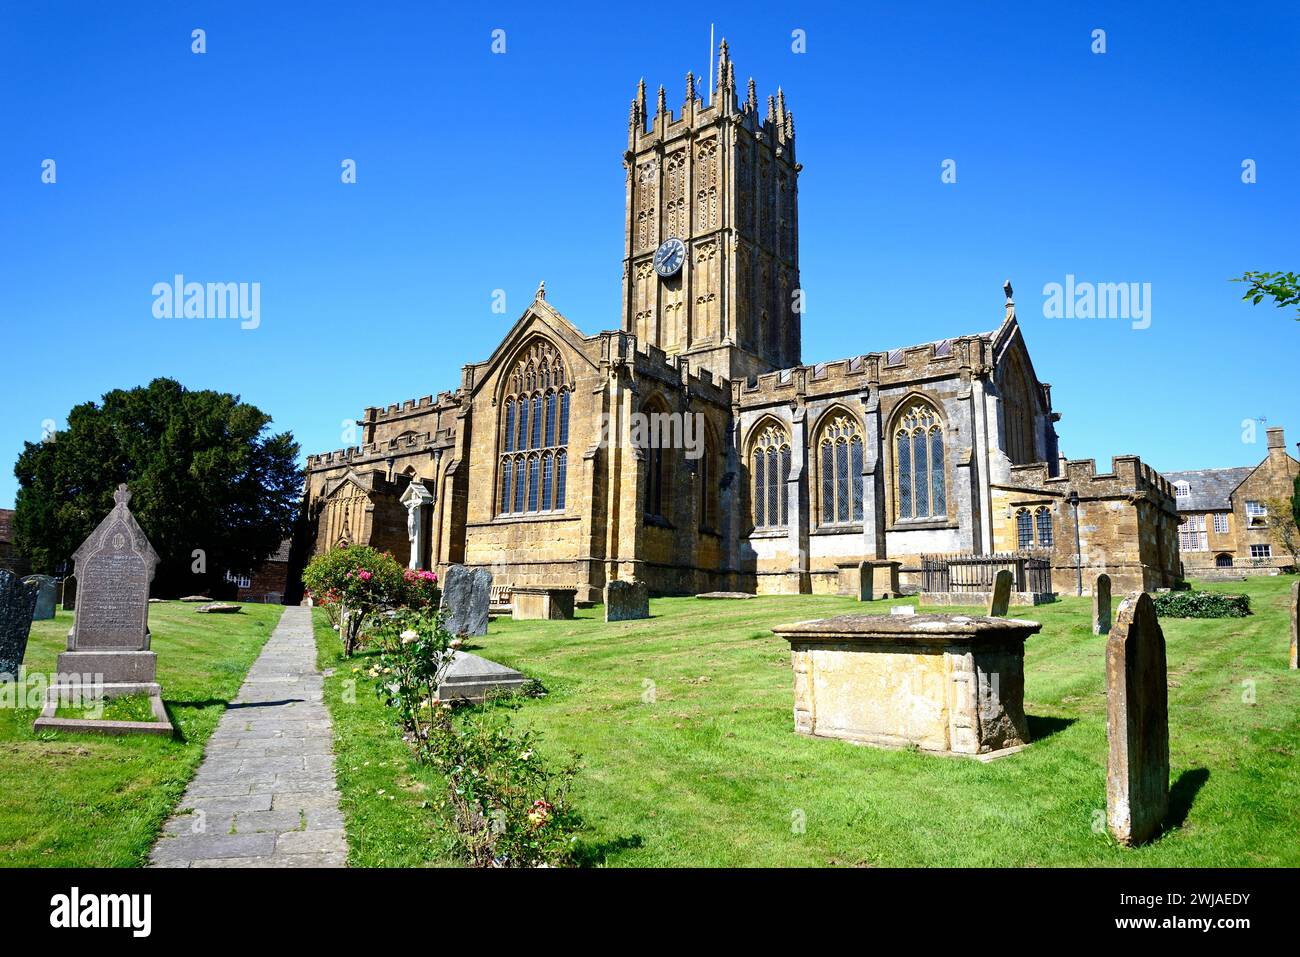 Front view of St Marys Minster Church in the town centre with the graveyard in the foreground, Ilminster, Somerset, UK. Stock Photo